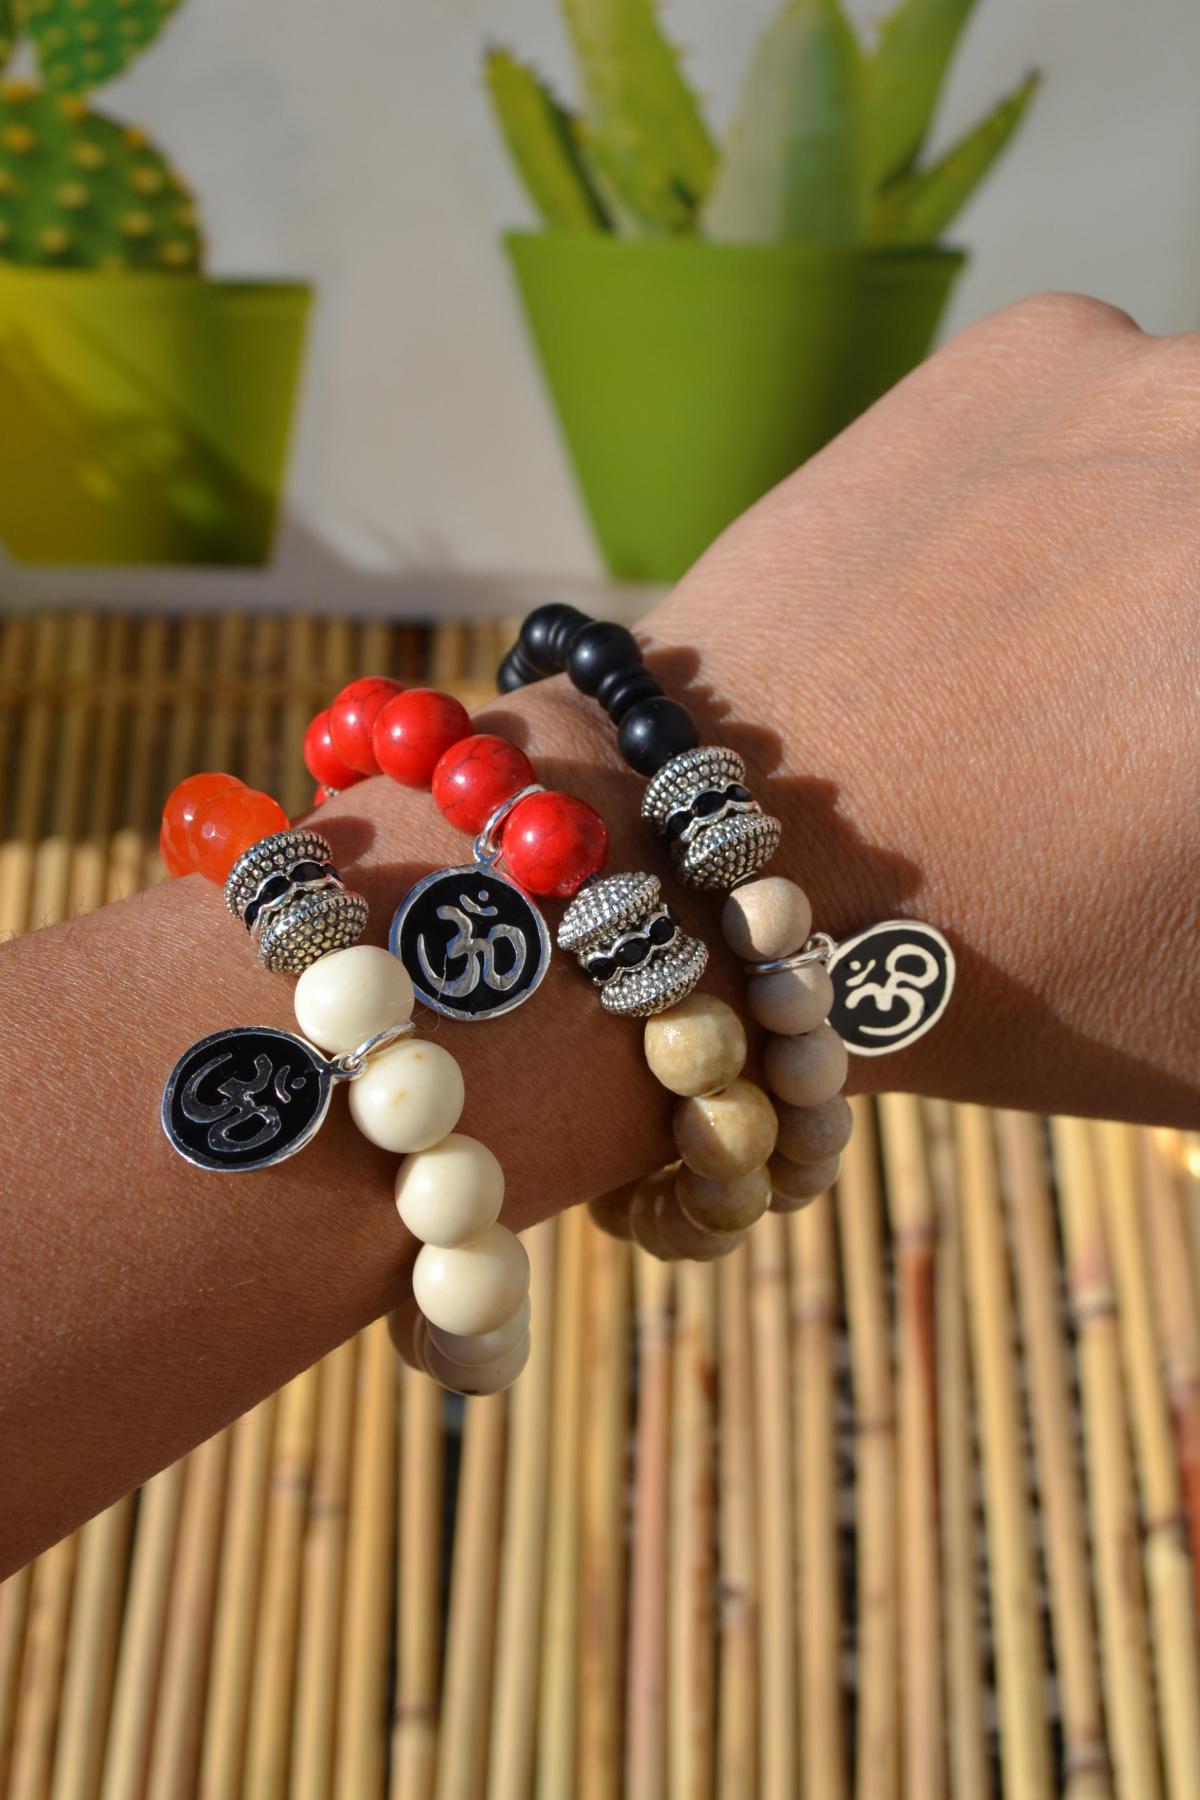 Bone Bead And Assorted Howlite Bead Bracelets With Silver Charm